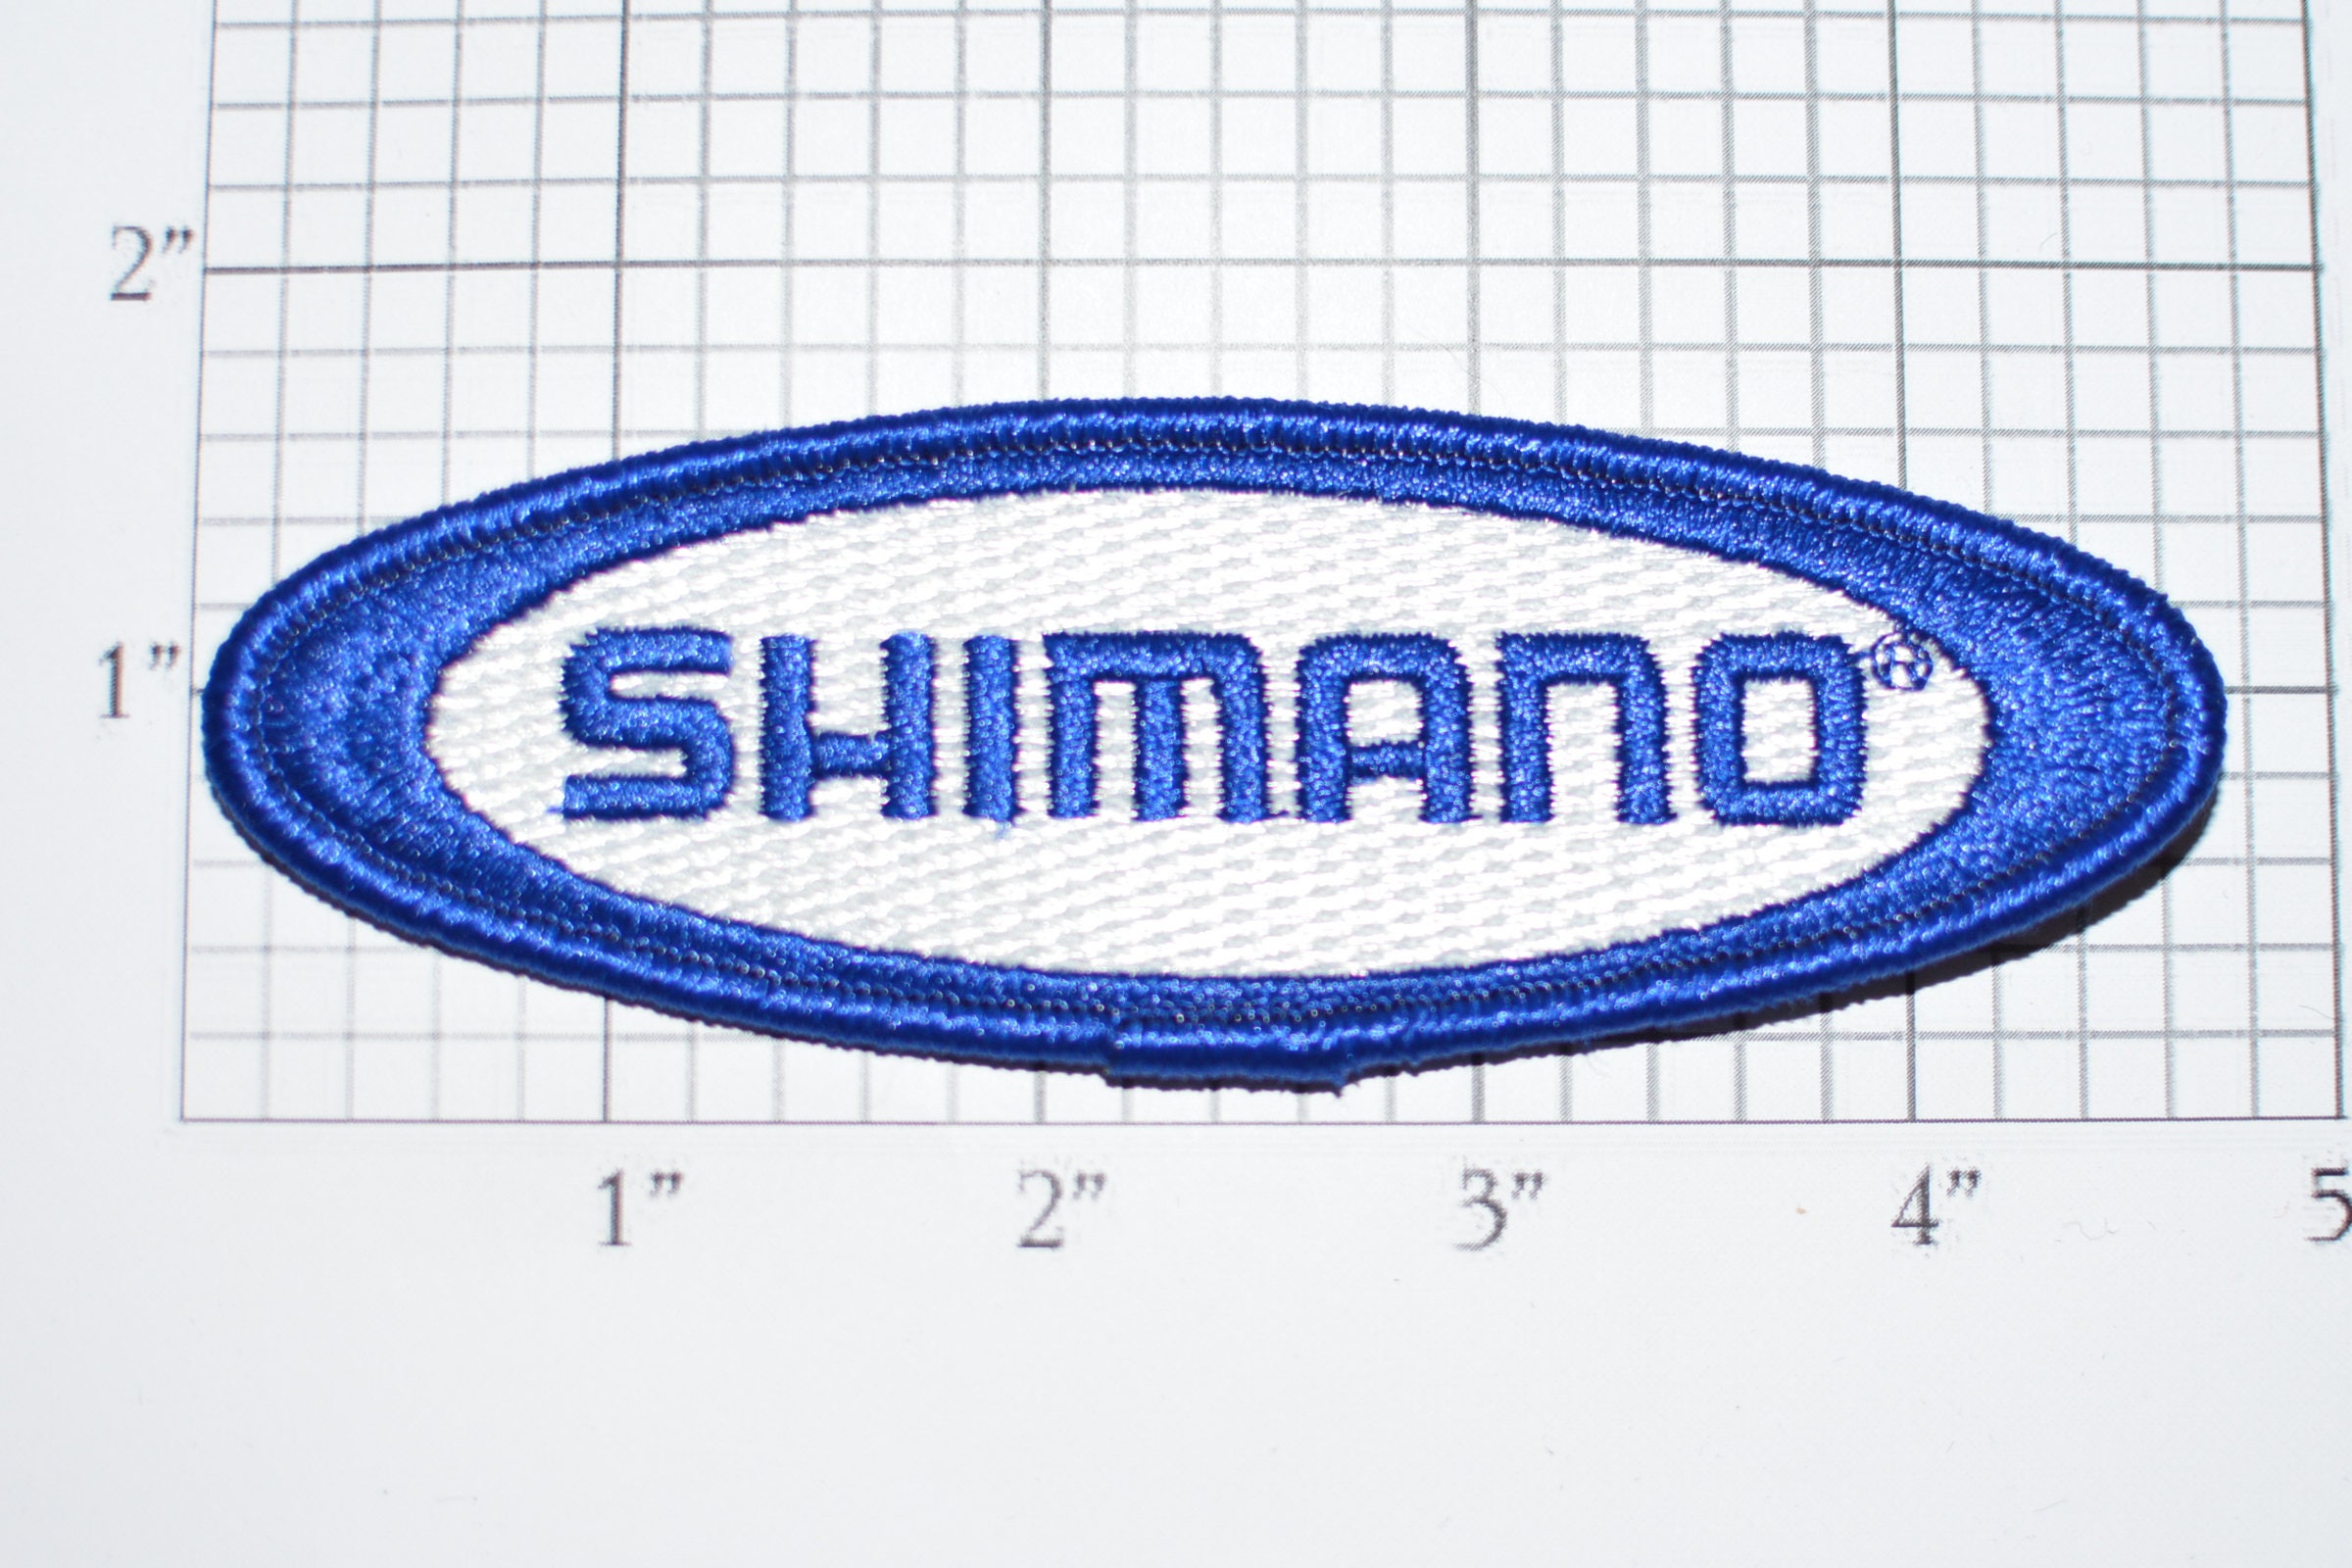 Shimano Fishing Tackle Gear Iron-on Embroidered Clothing Patch for Jacket  Shirt Hat Vest Backpack Gift Idea Men Guys Dad e28b